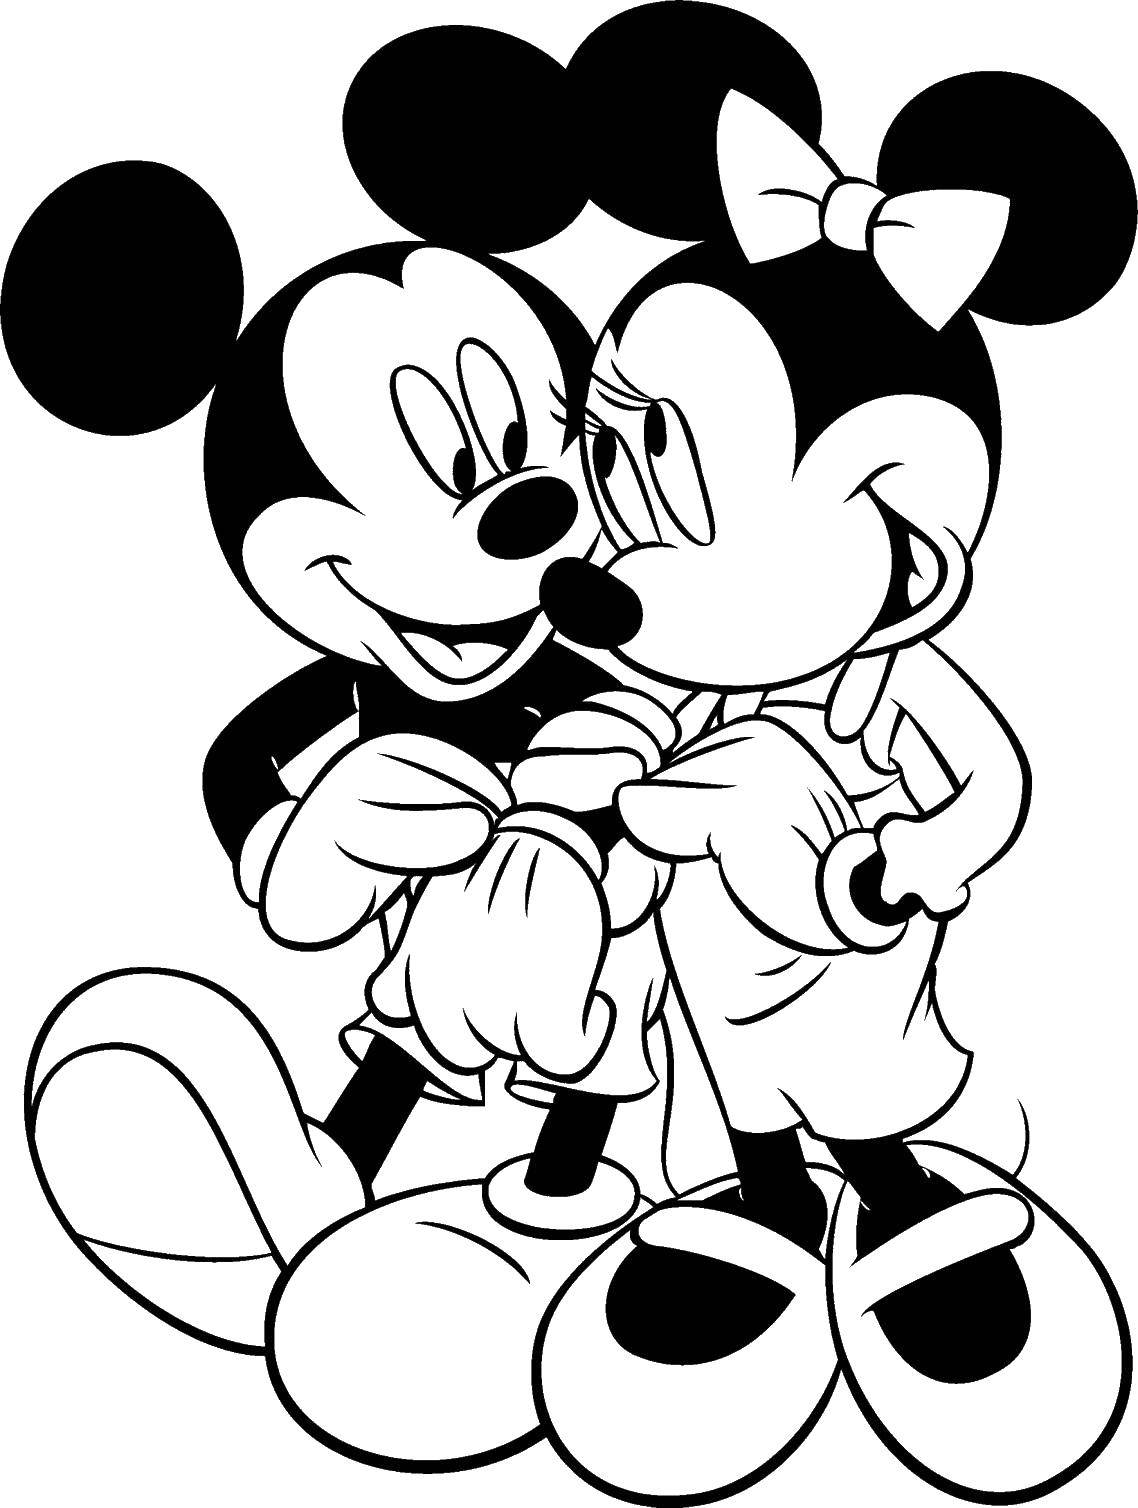 Coloring Mickey and Minnie mouse. Category Disney coloring pages. Tags:  Mickymaus, .